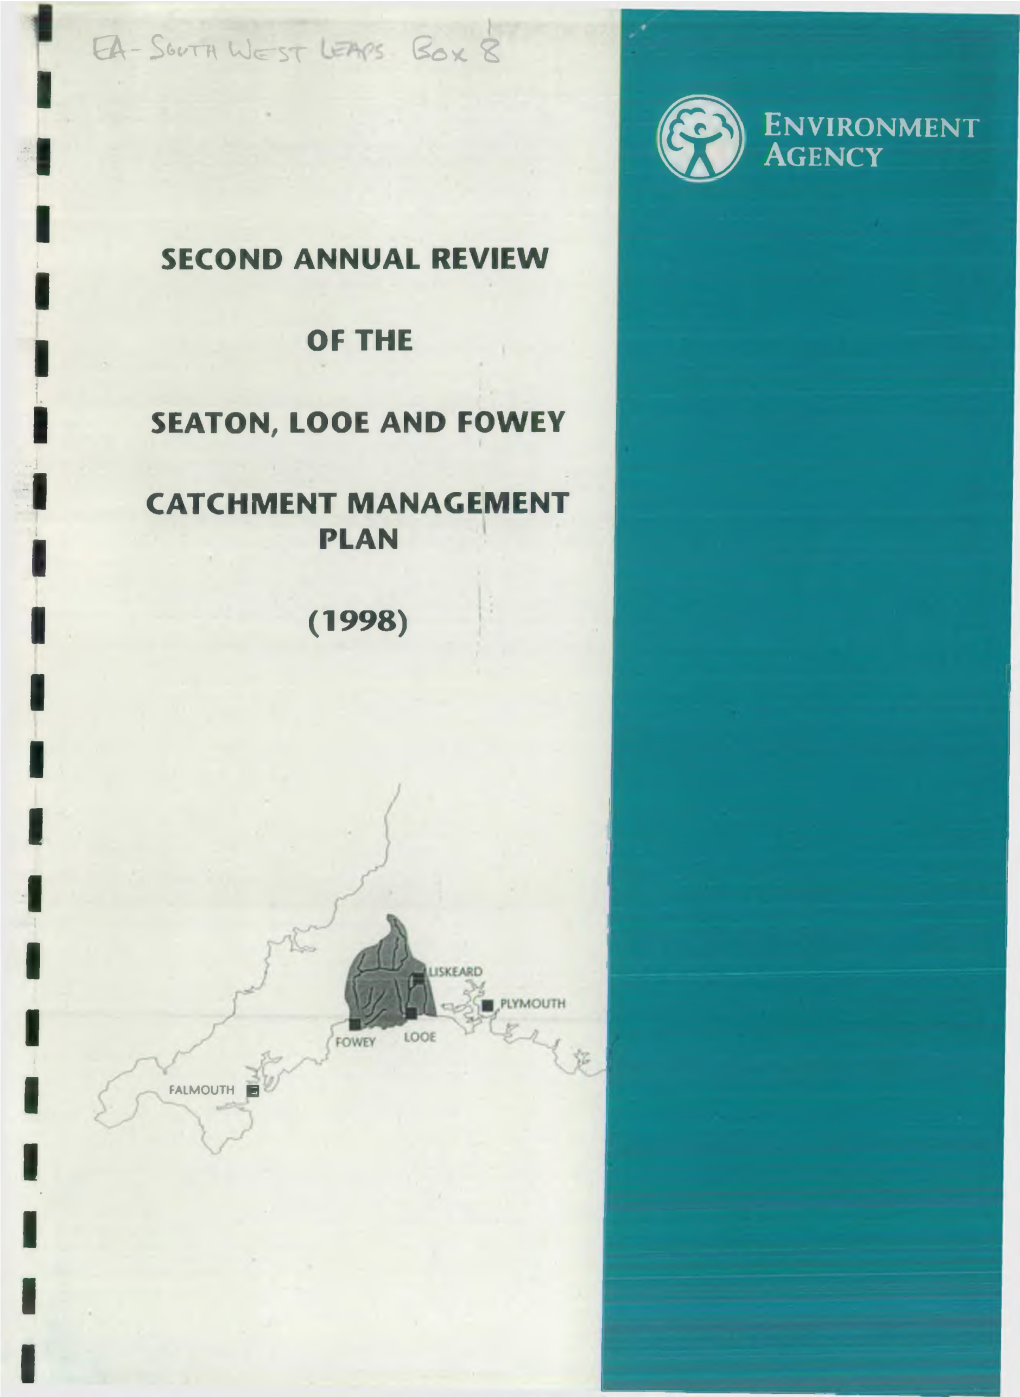 Second Annual Review of the Seaton, Looe and Fowey Action Plan Which Was Published in 1996